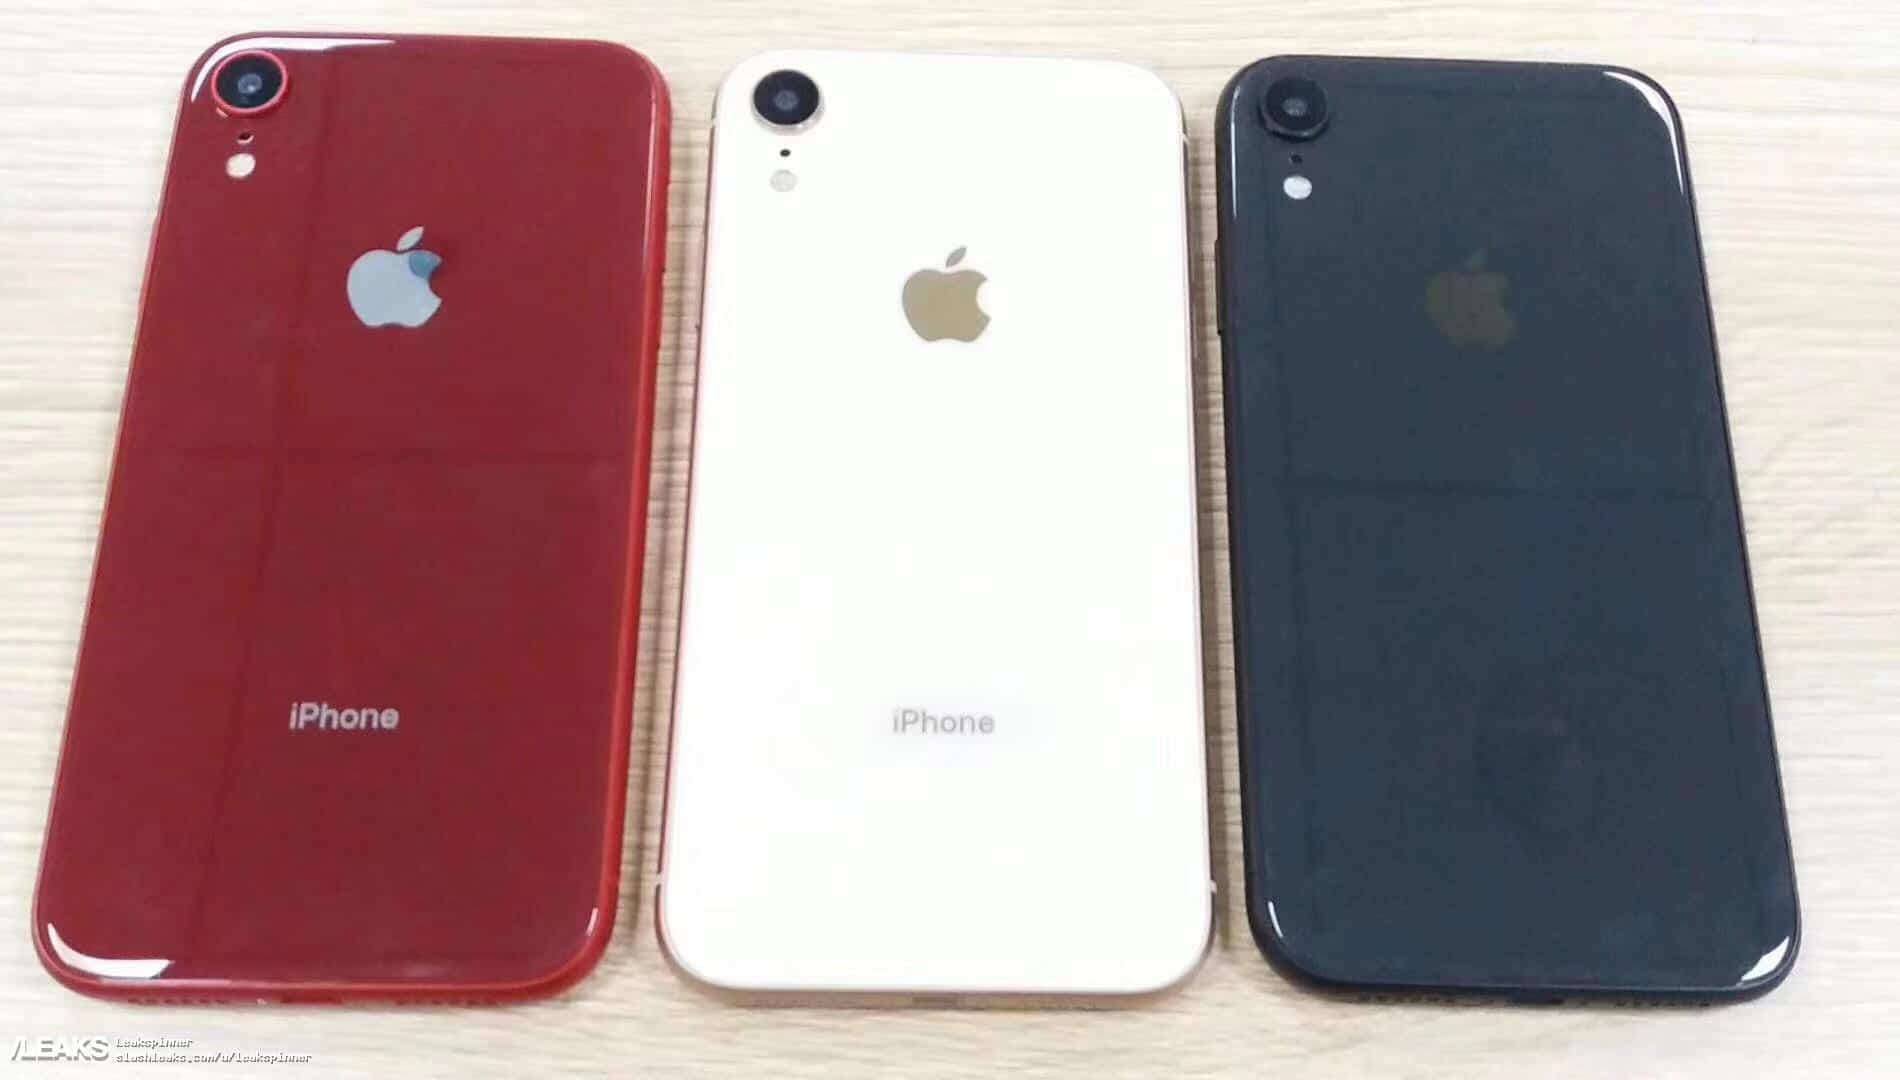 Leaked iPhone Xr SIM card trays reveal new color options | Cult of Mac